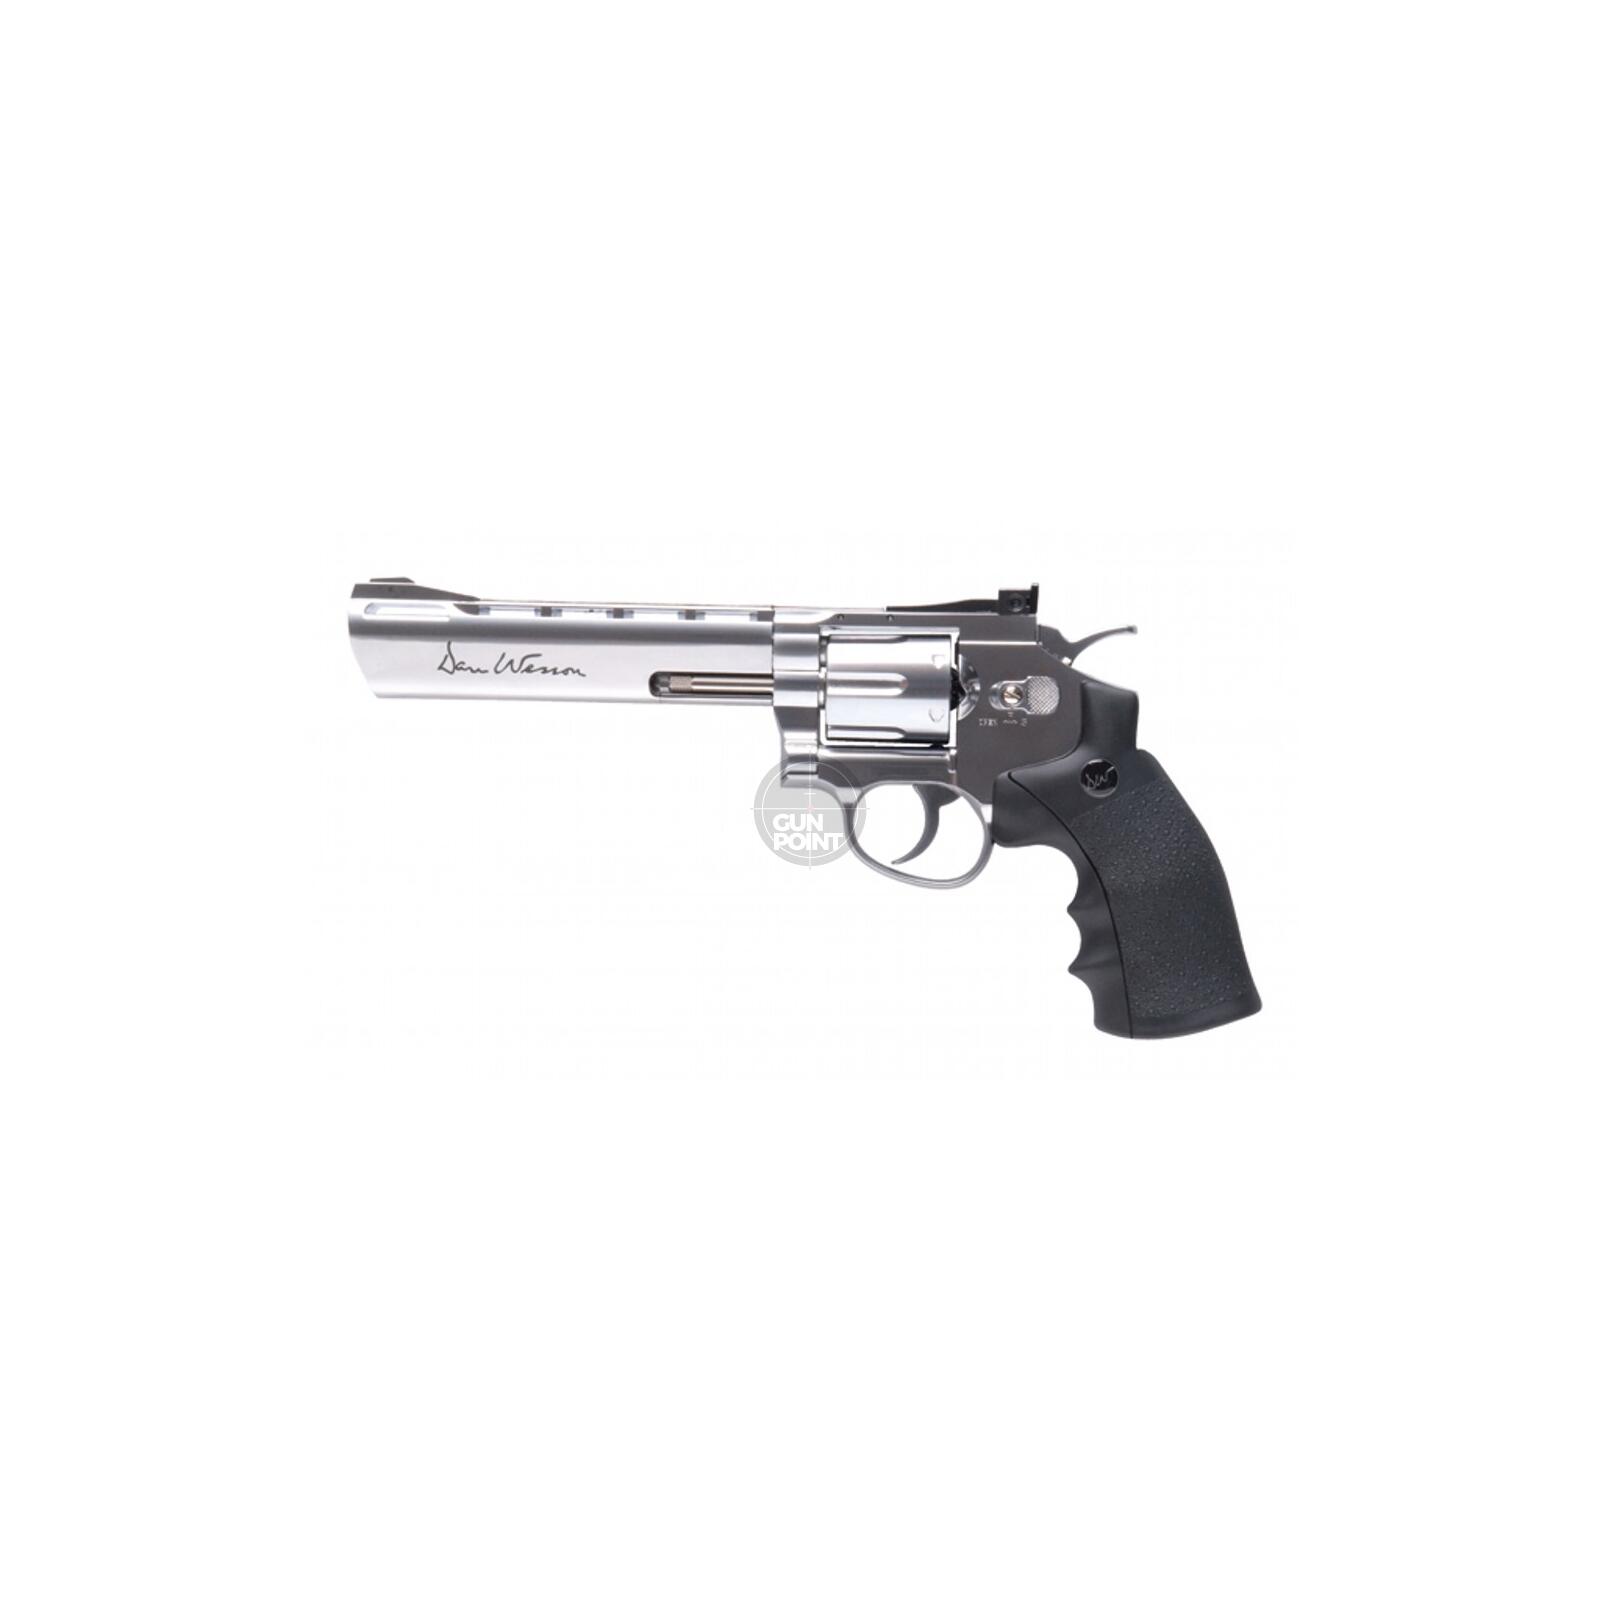 Luftpistole - Dan Wesson 6 Co2-System NBB Silber - Kal. 4,5 mm